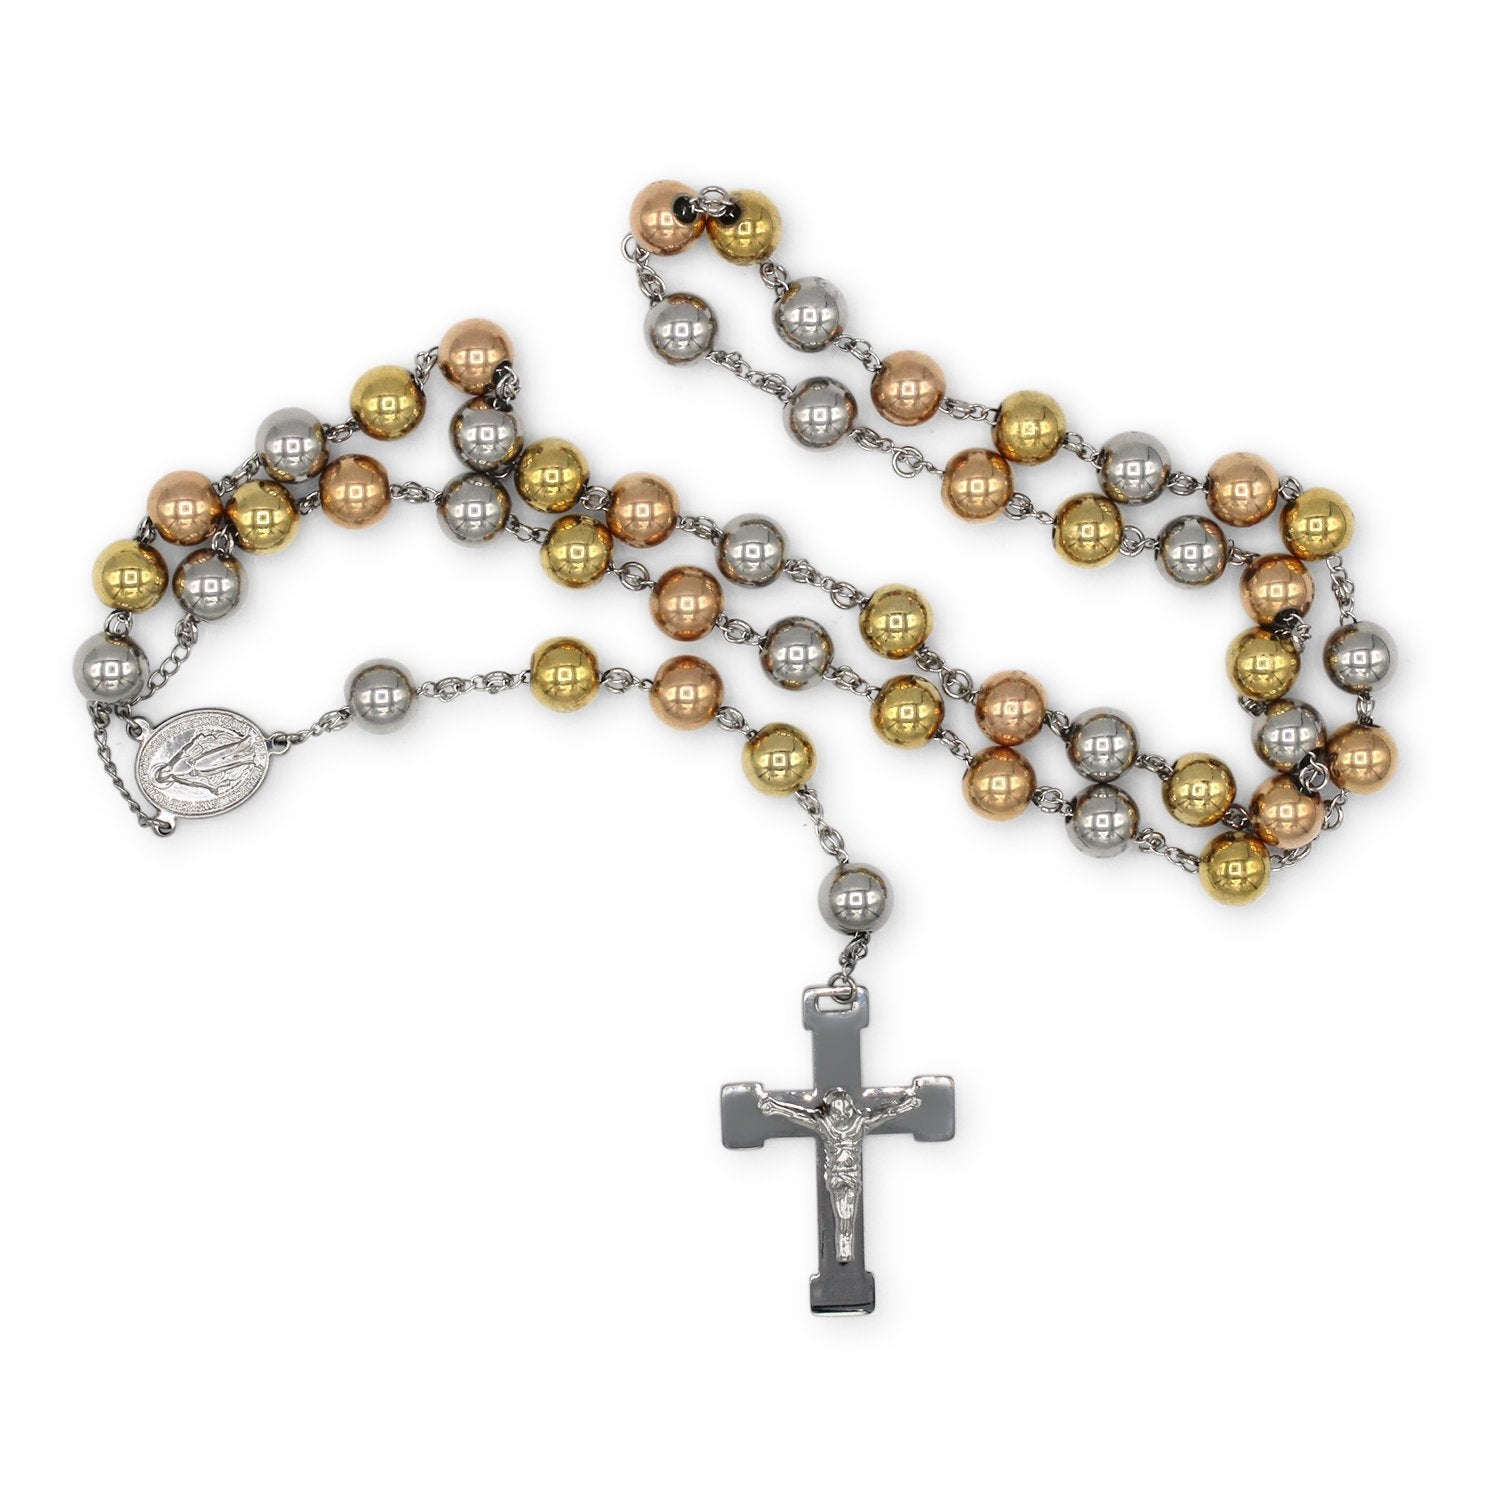 Traditional Tri Tone Rosary Necklace Five Decade Catholic Prayer Beads 10 mm